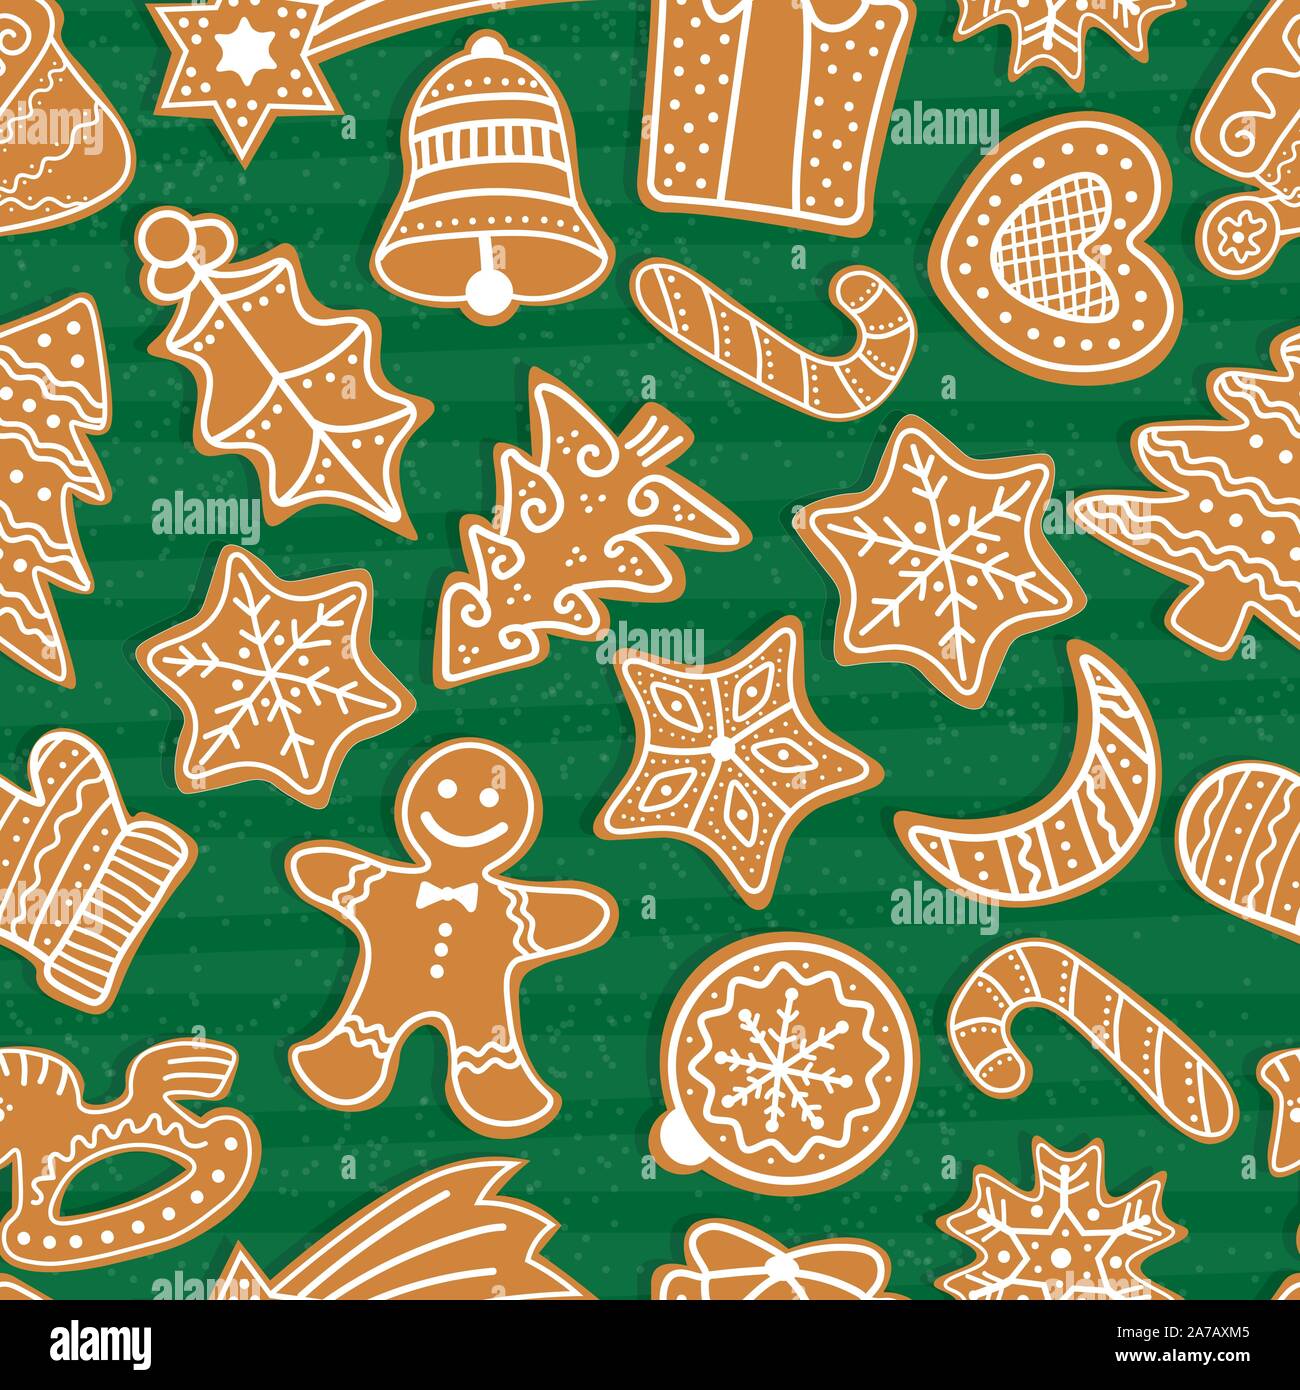 Gingerbread men and Christmas tree, star, bell, house, cane, heart, ball, crescent, present, mistletoe. Vector Christmas seamless pattern with gingerb Stock Vector